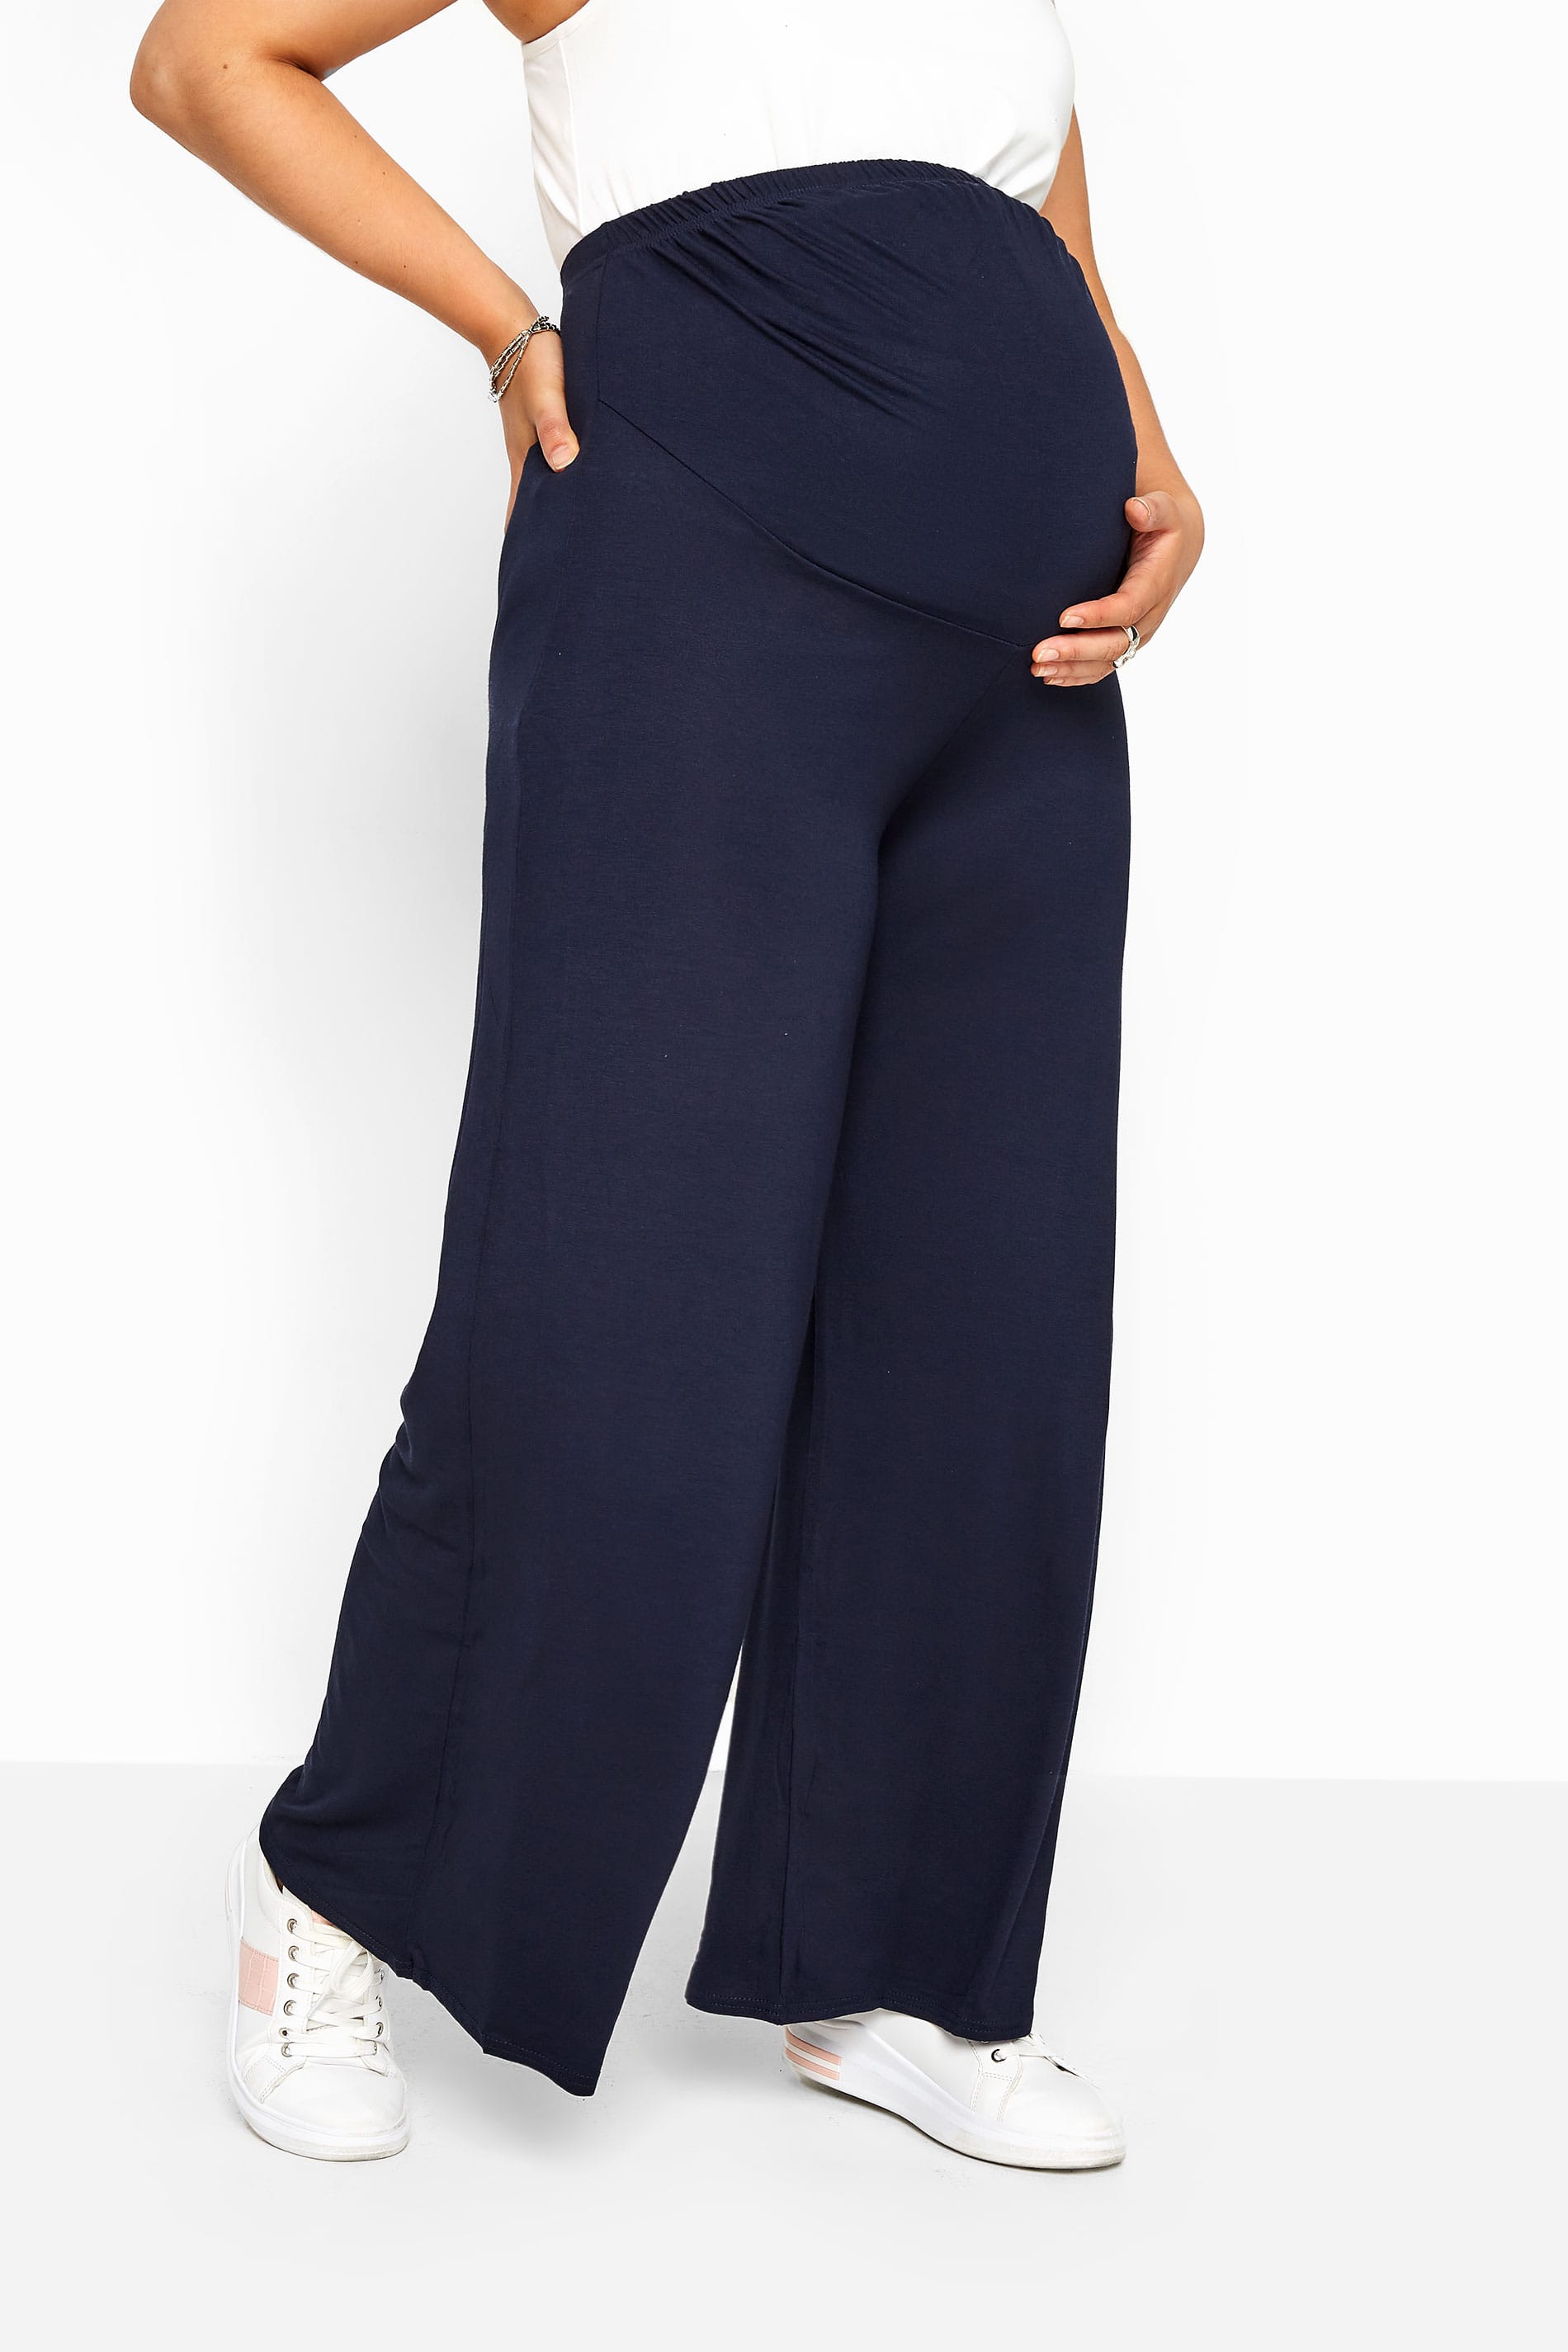 BUMP IT UP MATERNITY Navy Palazzo Trousers With Comfort 